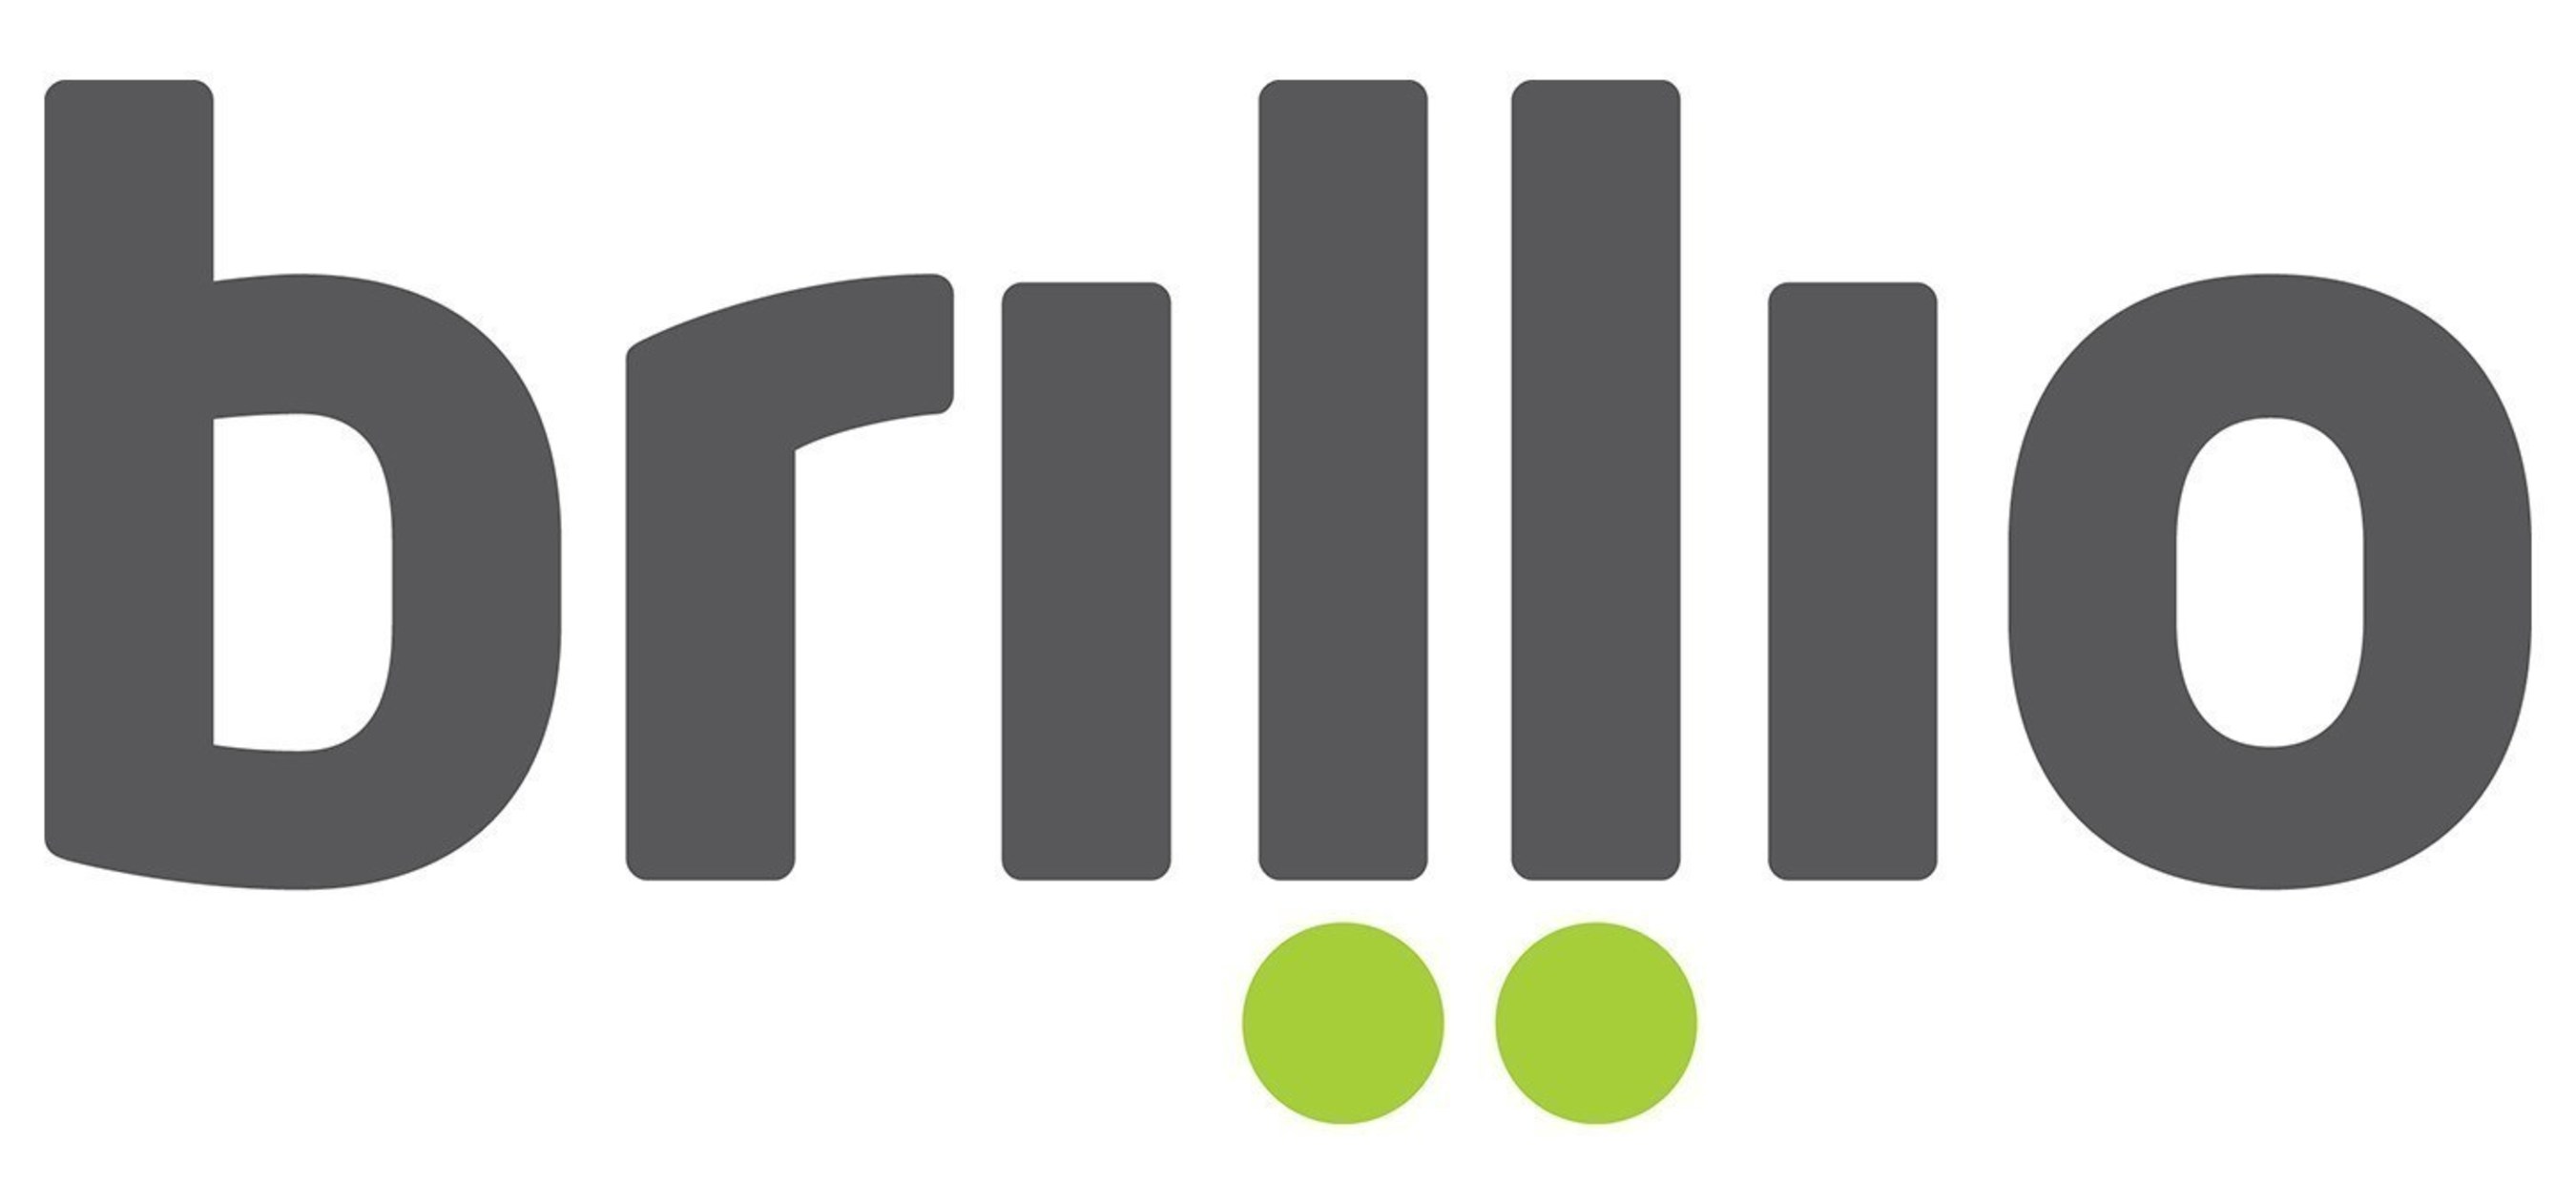 Brillio is a global technology consulting, software, and business solutions company that utilizes emerging technologies in big data analytics, digital, and automation to create new customer experiences, achieve cost efficiencies, and gain competitive advantage.